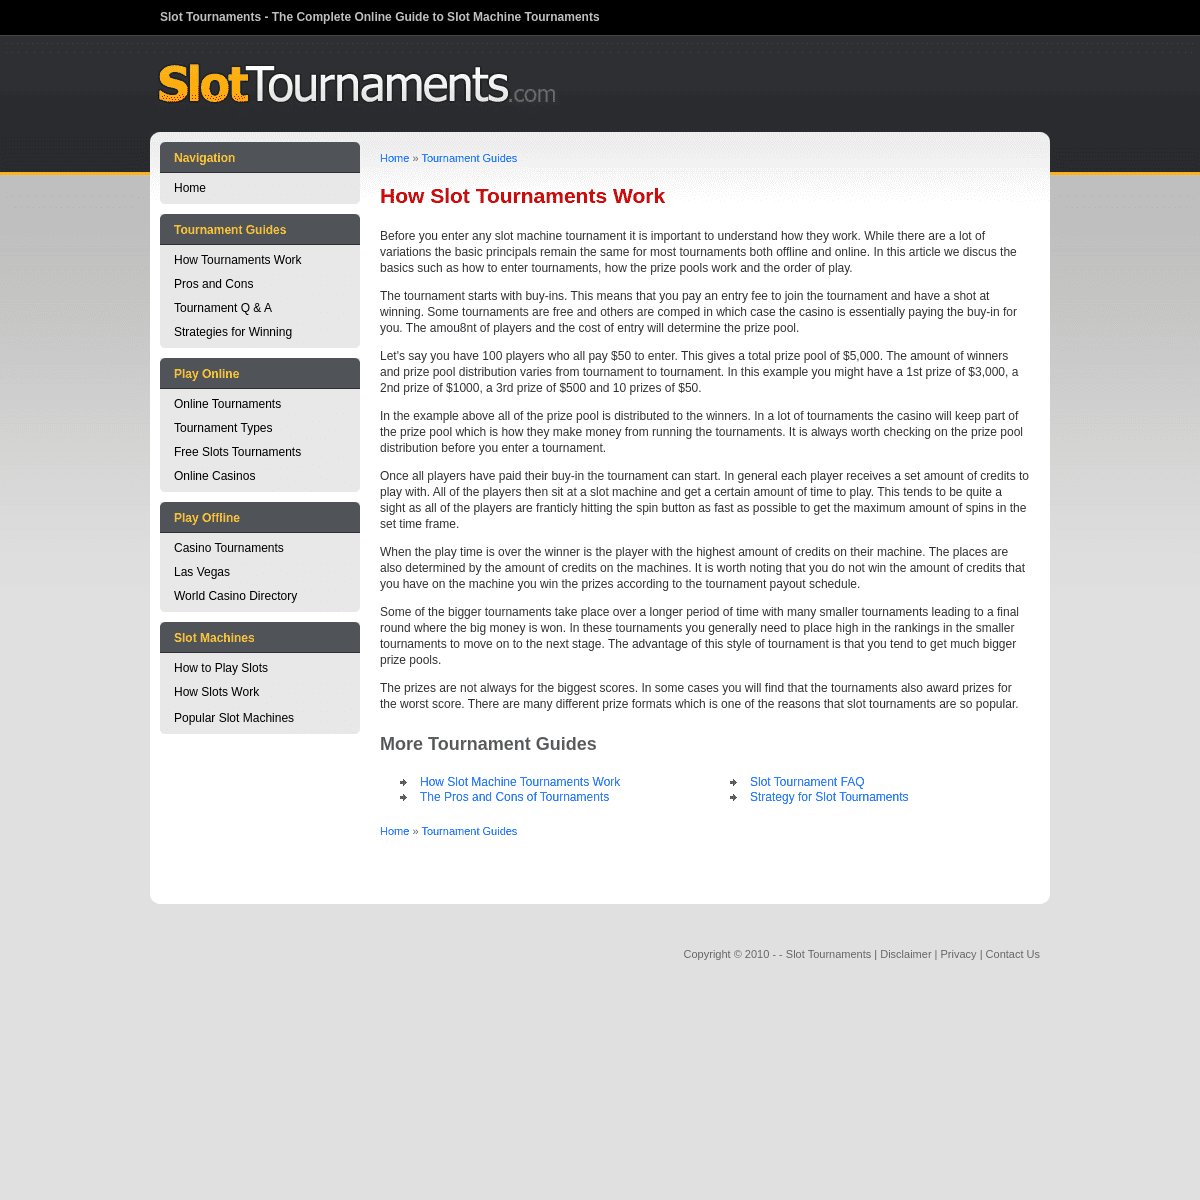 A complete backup of https://www.slottournaments.com/guides/how-tournaments-work.htm